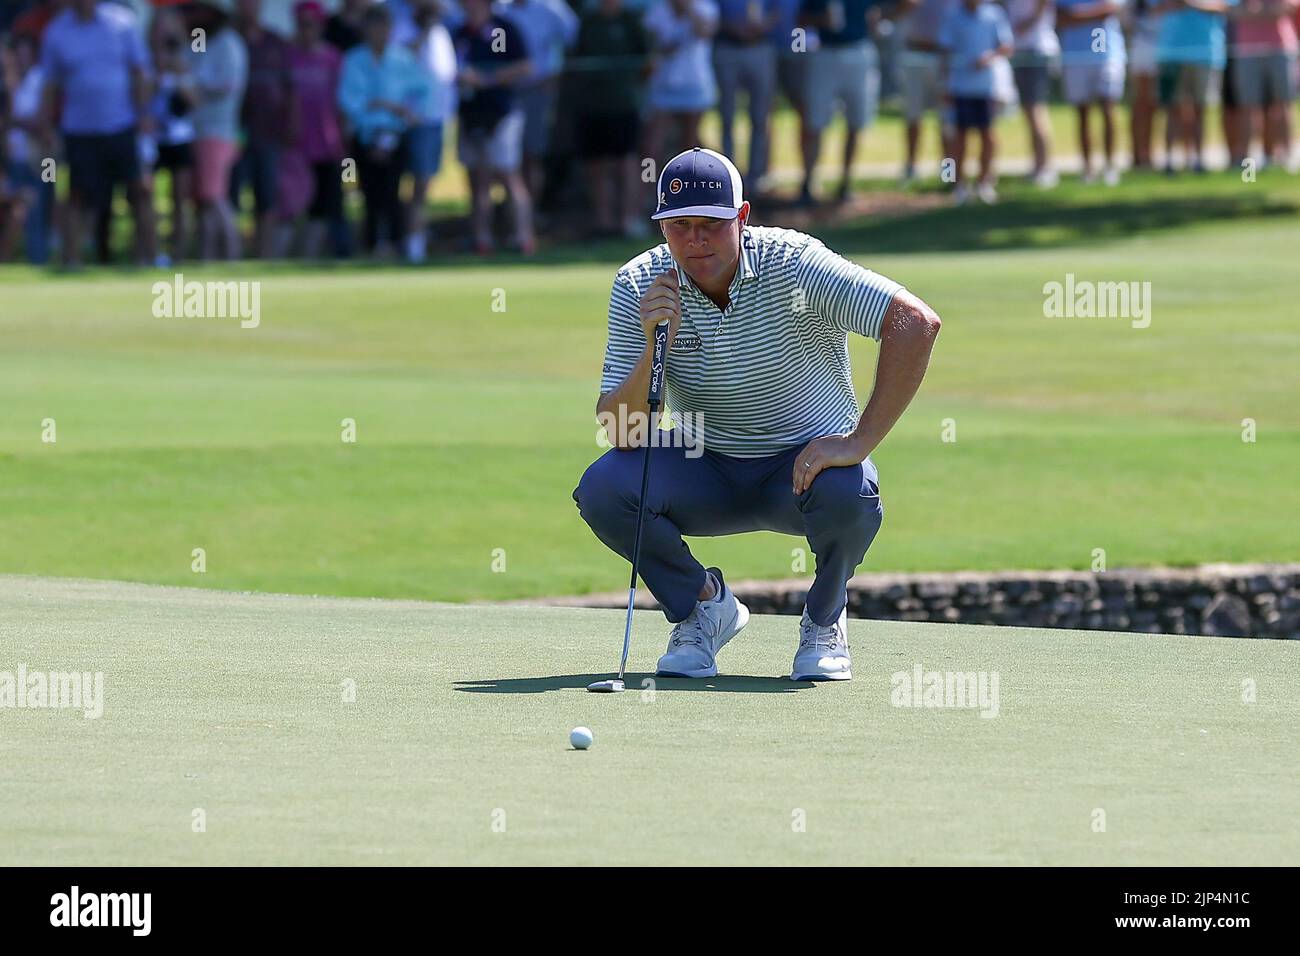 August 14, 2022: Trey Mullinax sizes up his putt during the final round of the FedEx St. Jude Championship golf tournament at TPC Southwind in Memphis, TN. Gray Siegel/Cal Sport Media Stock Photo